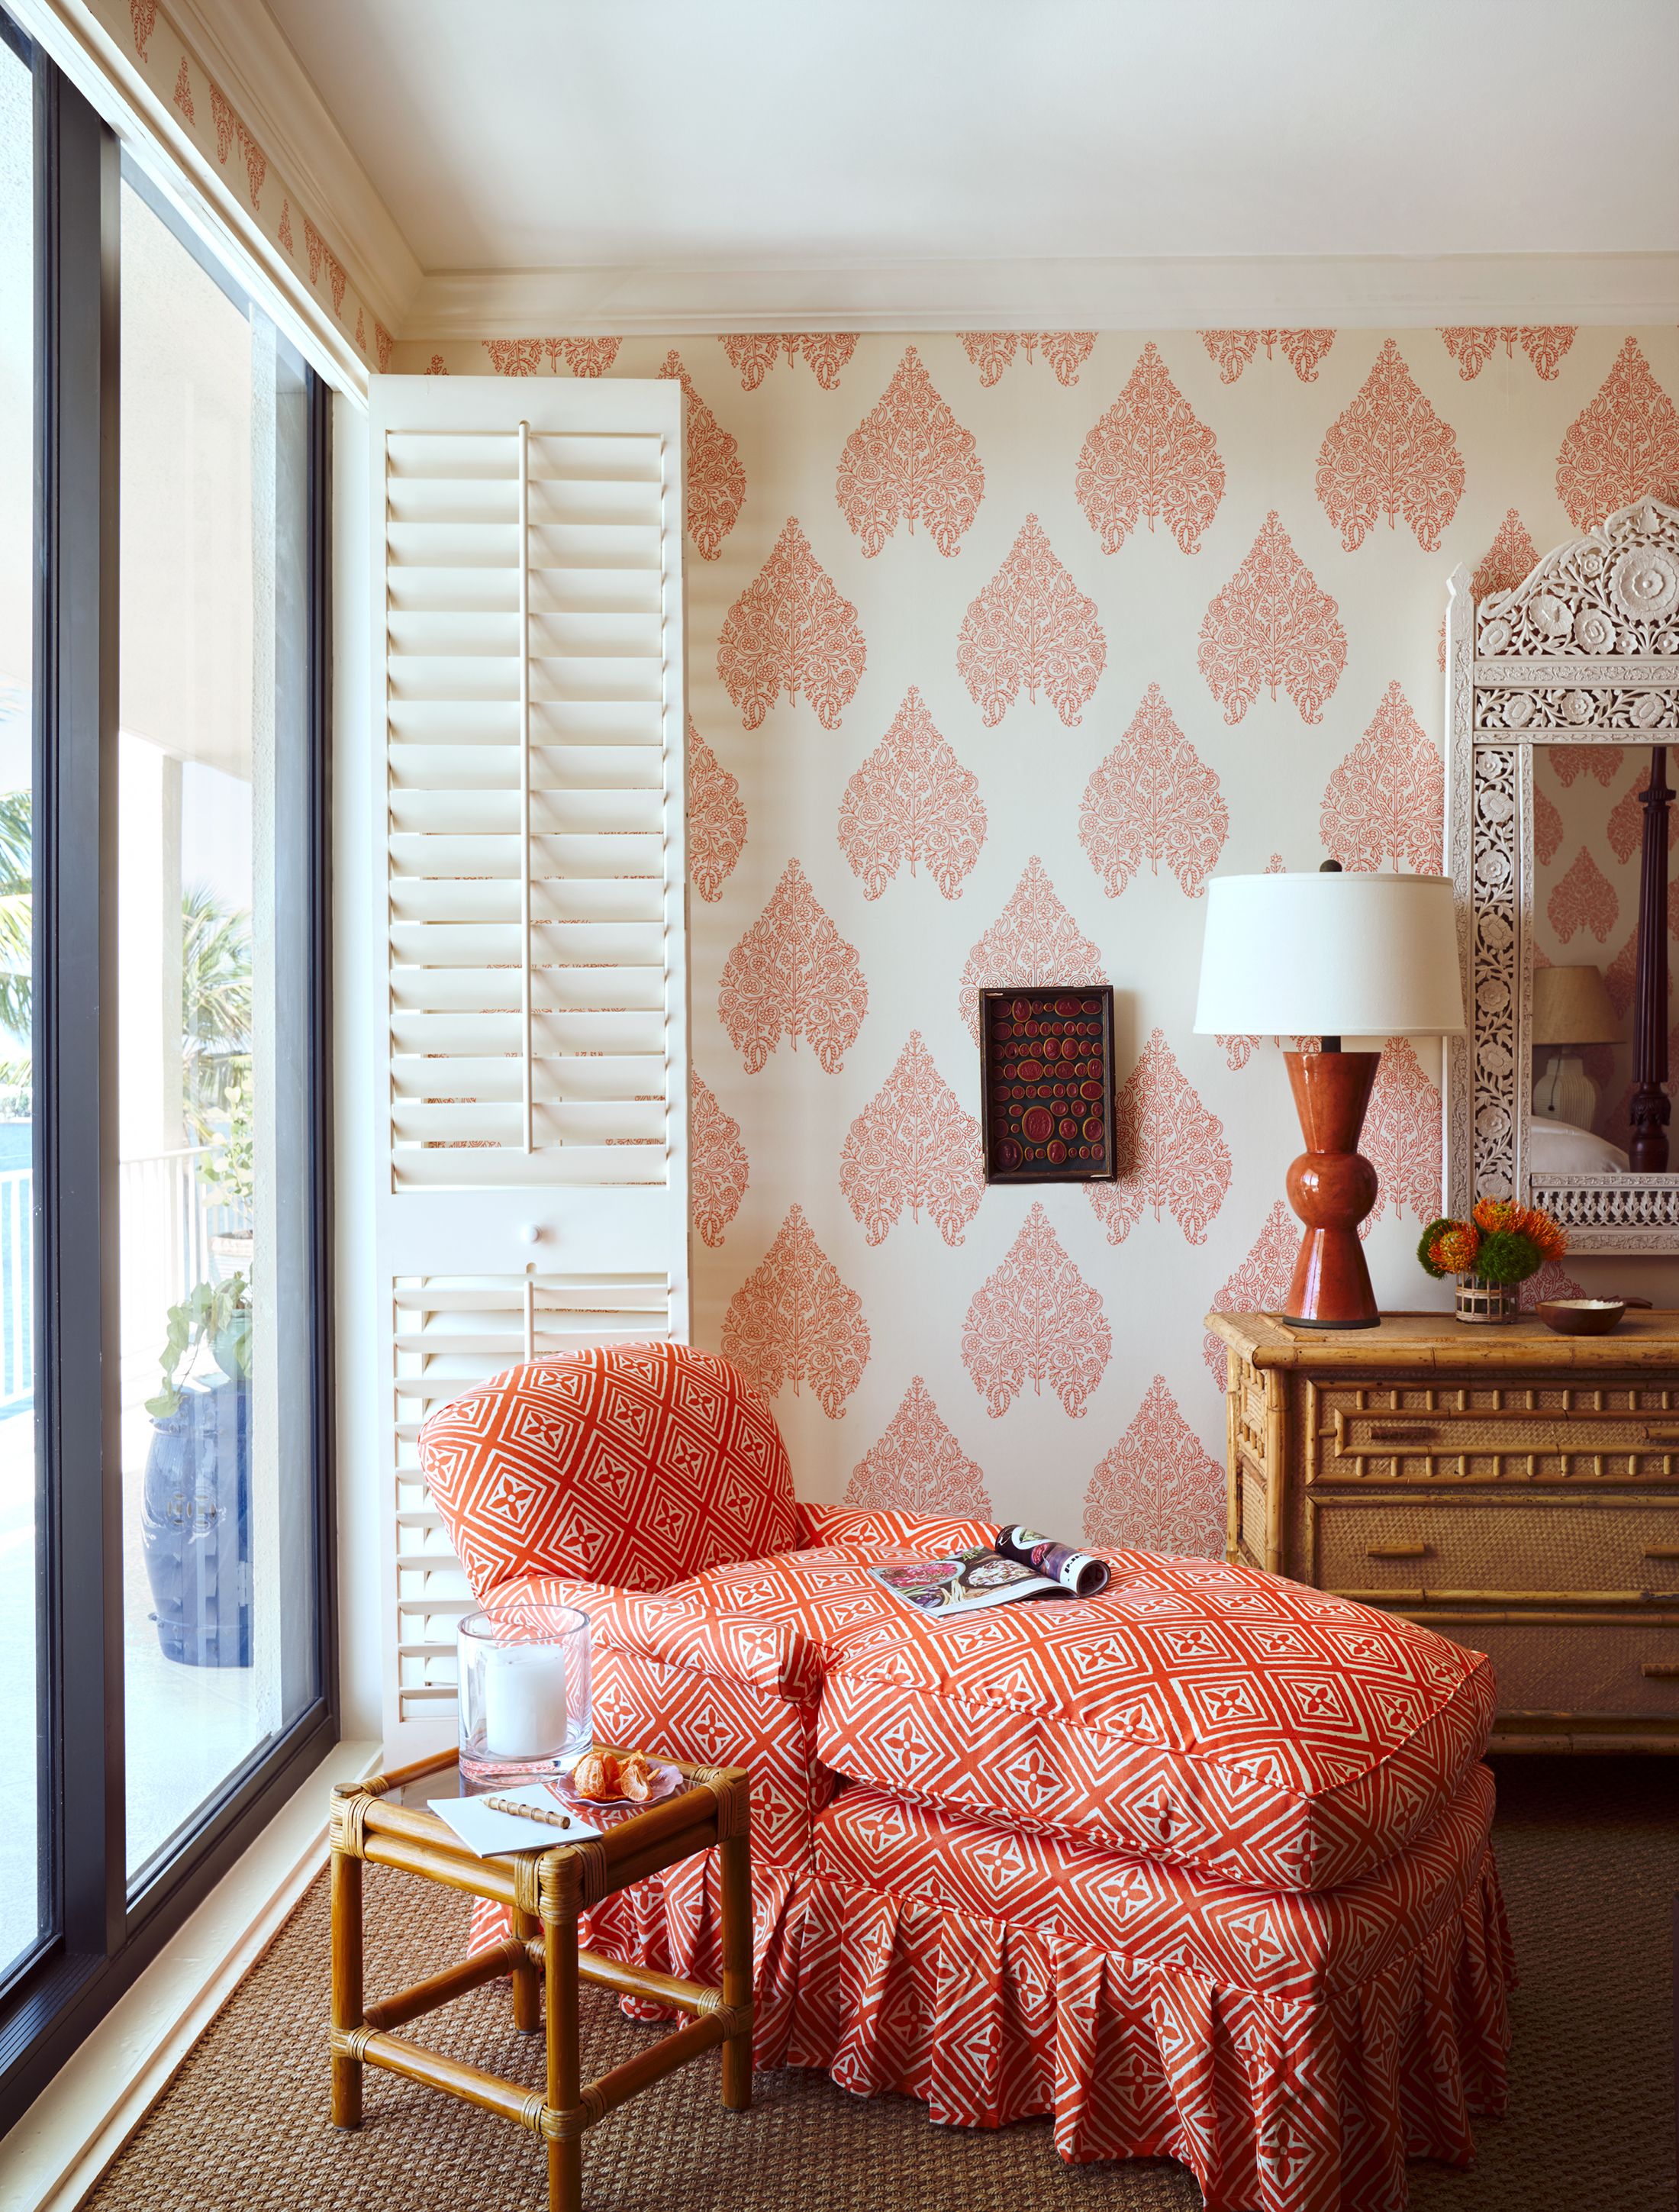 Brilliant Wallpaper Patterns For A Young Home - New Look